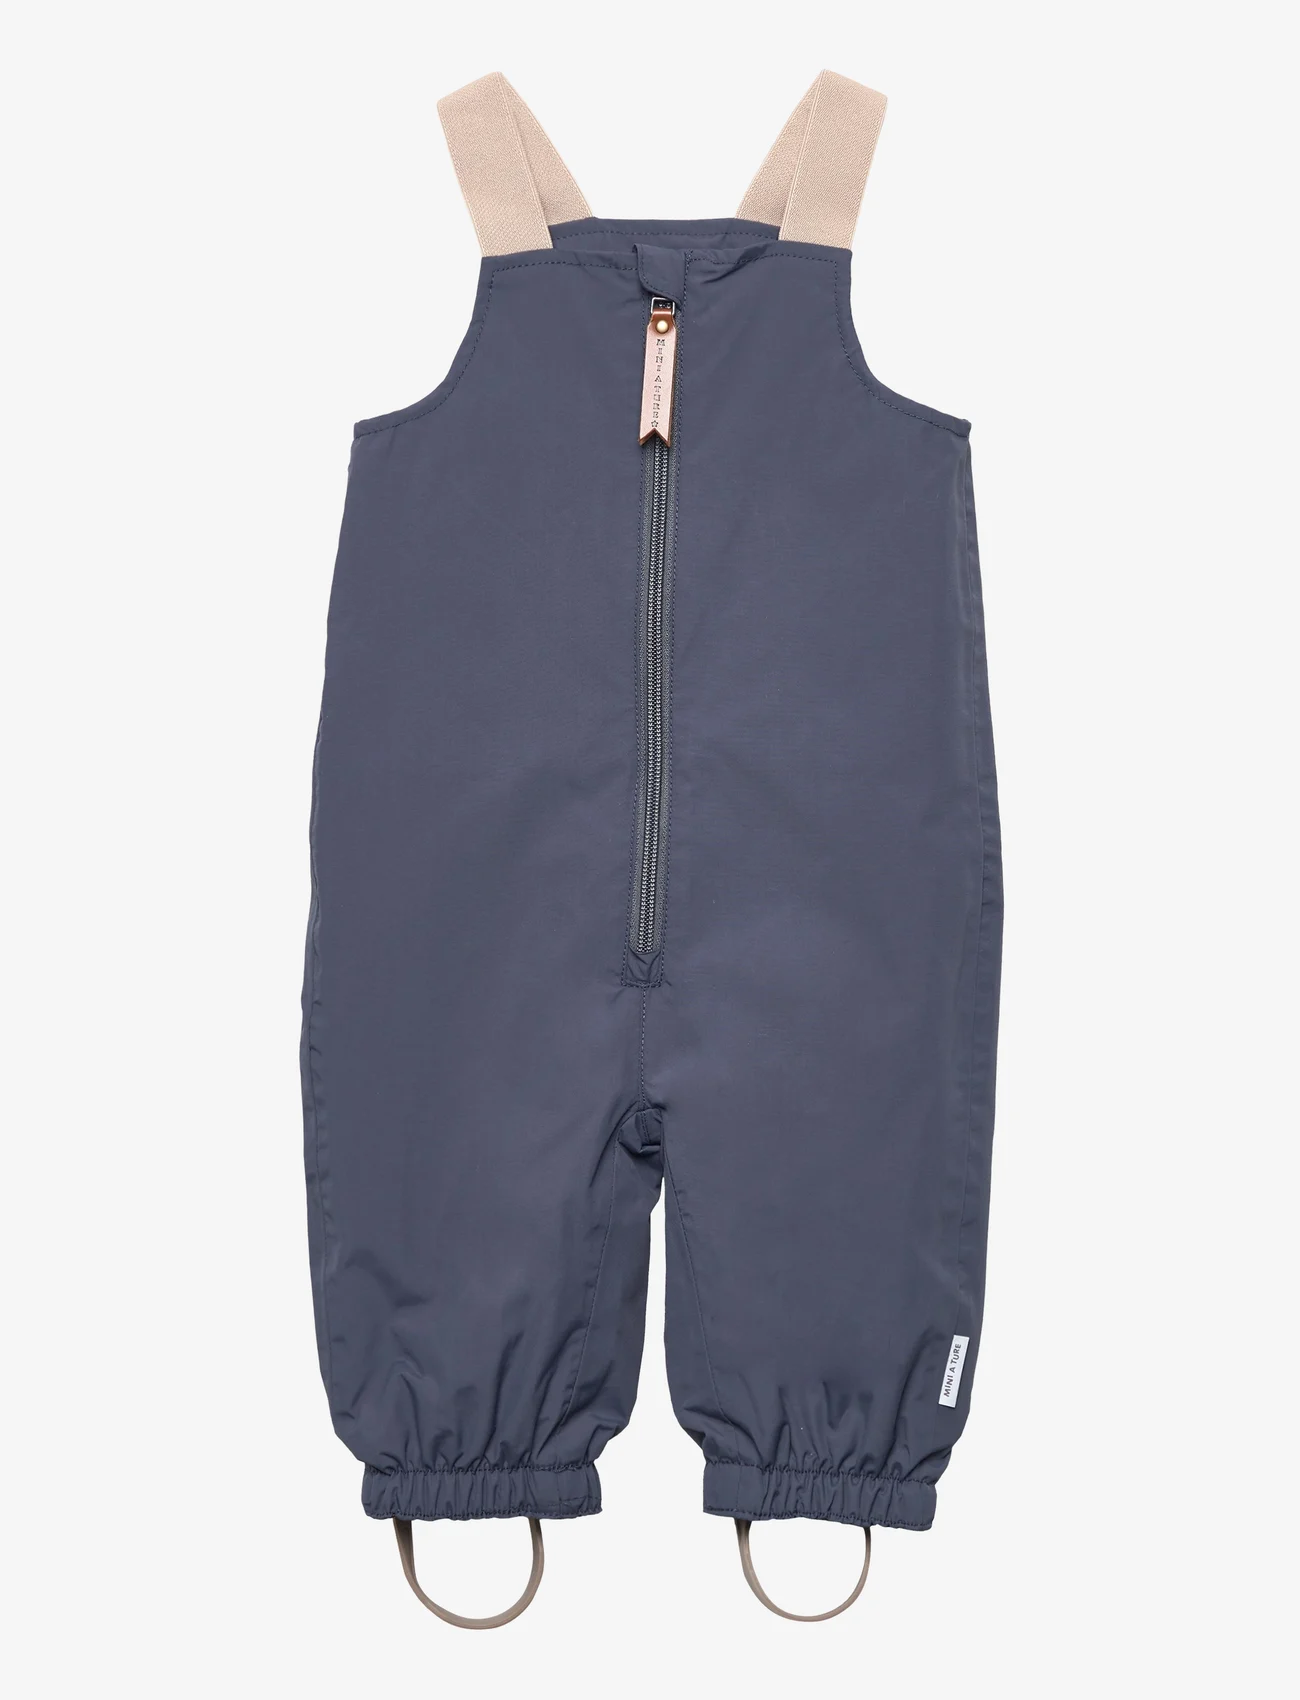 Mini A Ture - Walentaya spring overalls. GRS - regenoverall - ombre blue - 0